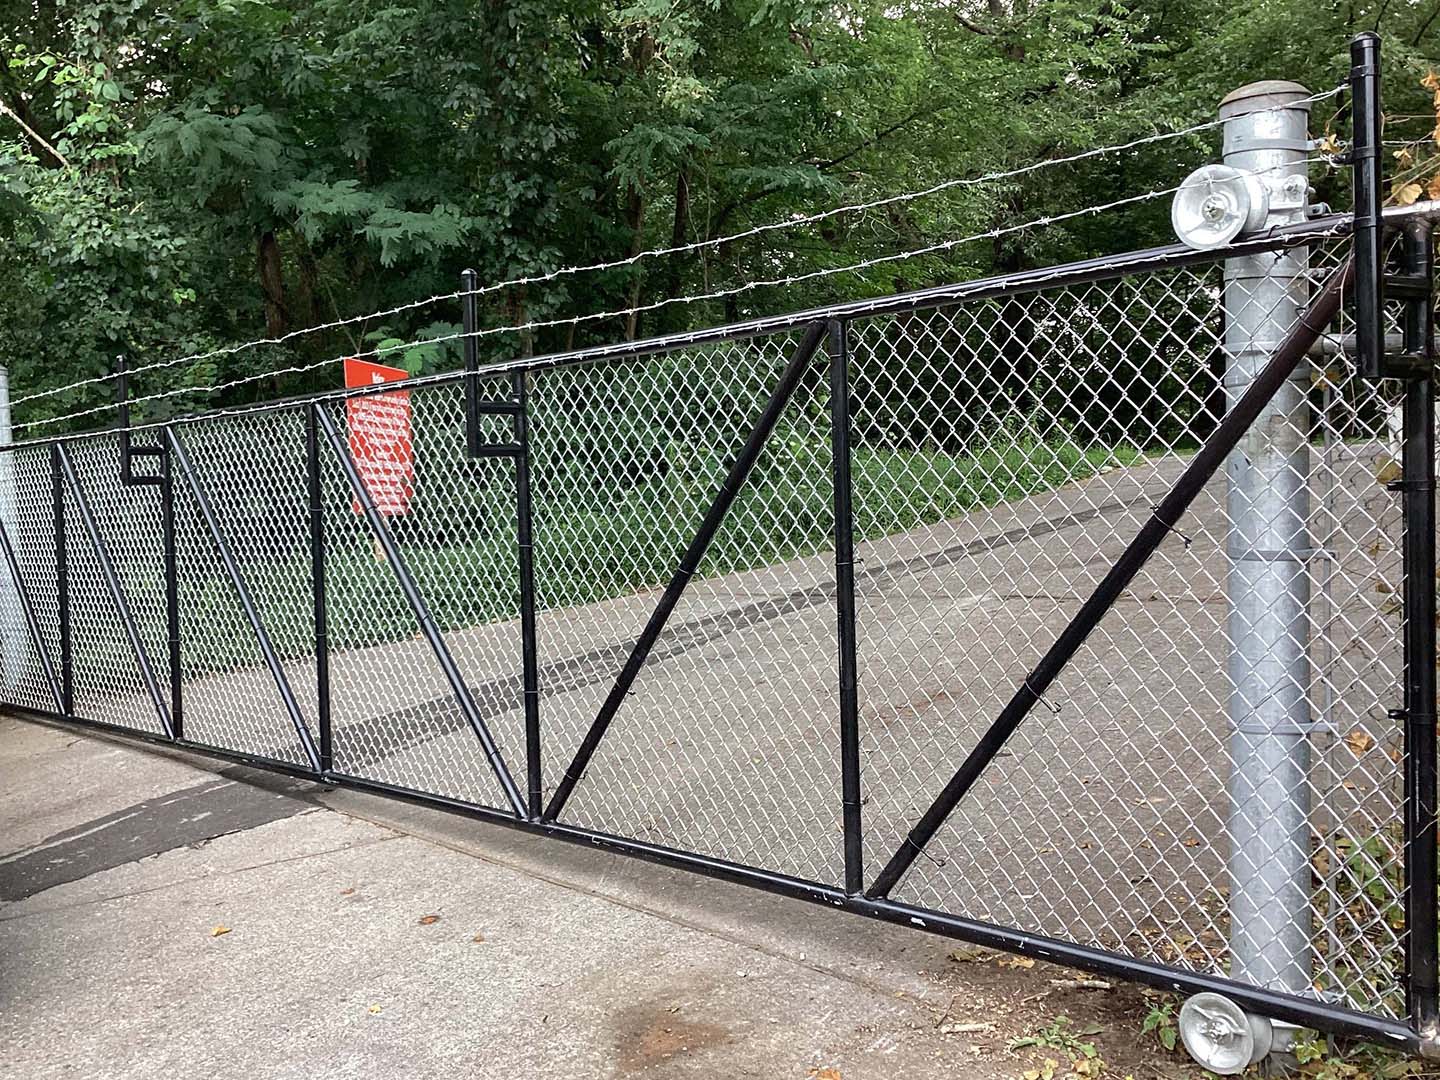 Photo of a commercial gate from a North Georgia fencing contractor